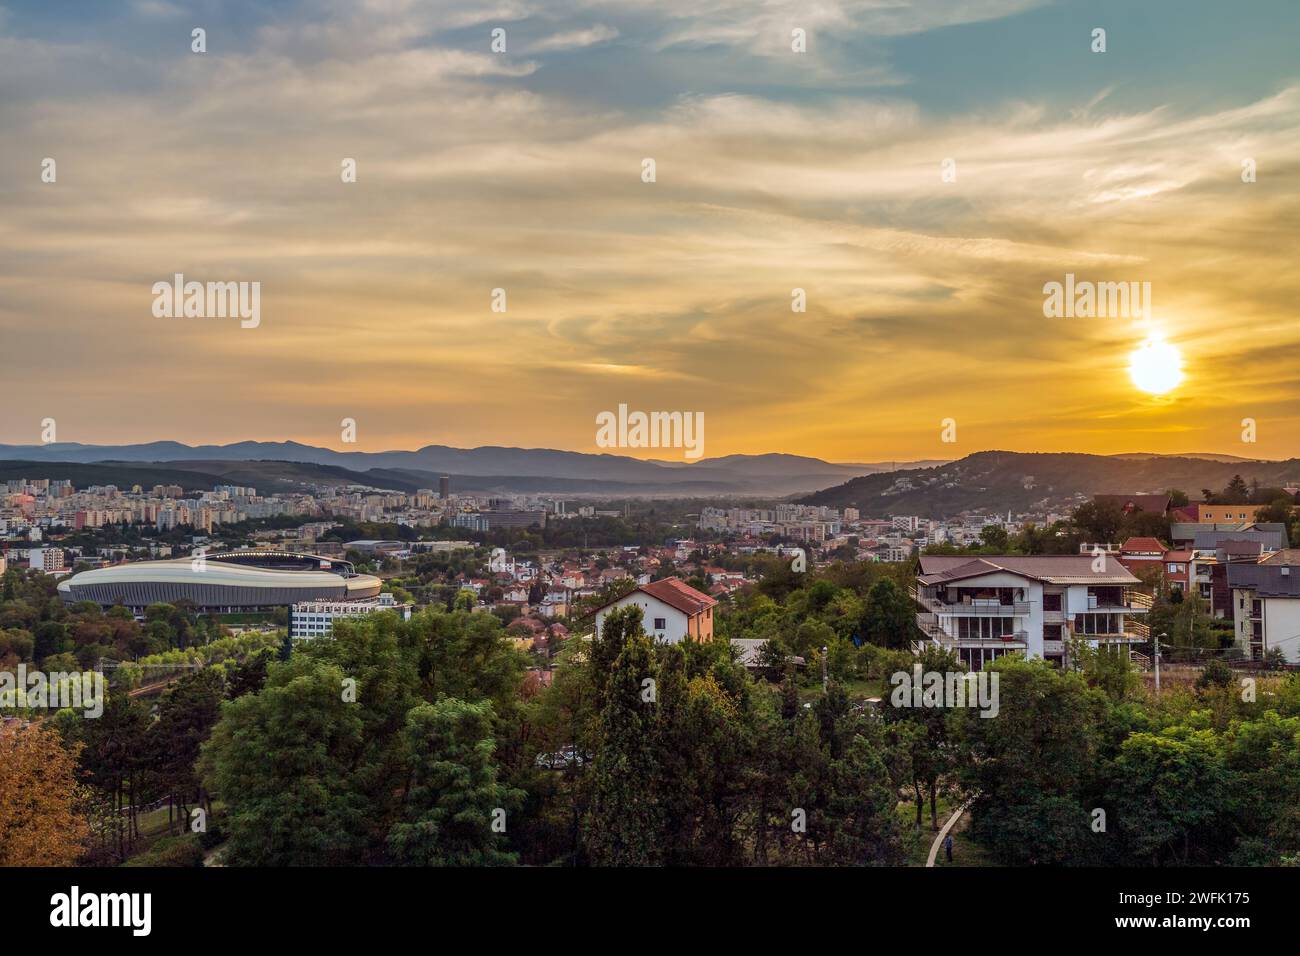 CLUJ-NAPOCA, ROMANIA - SEPTEMBER 20, 2020: Panoramic and aerial view over the city from Citadel Hill Stock Photo